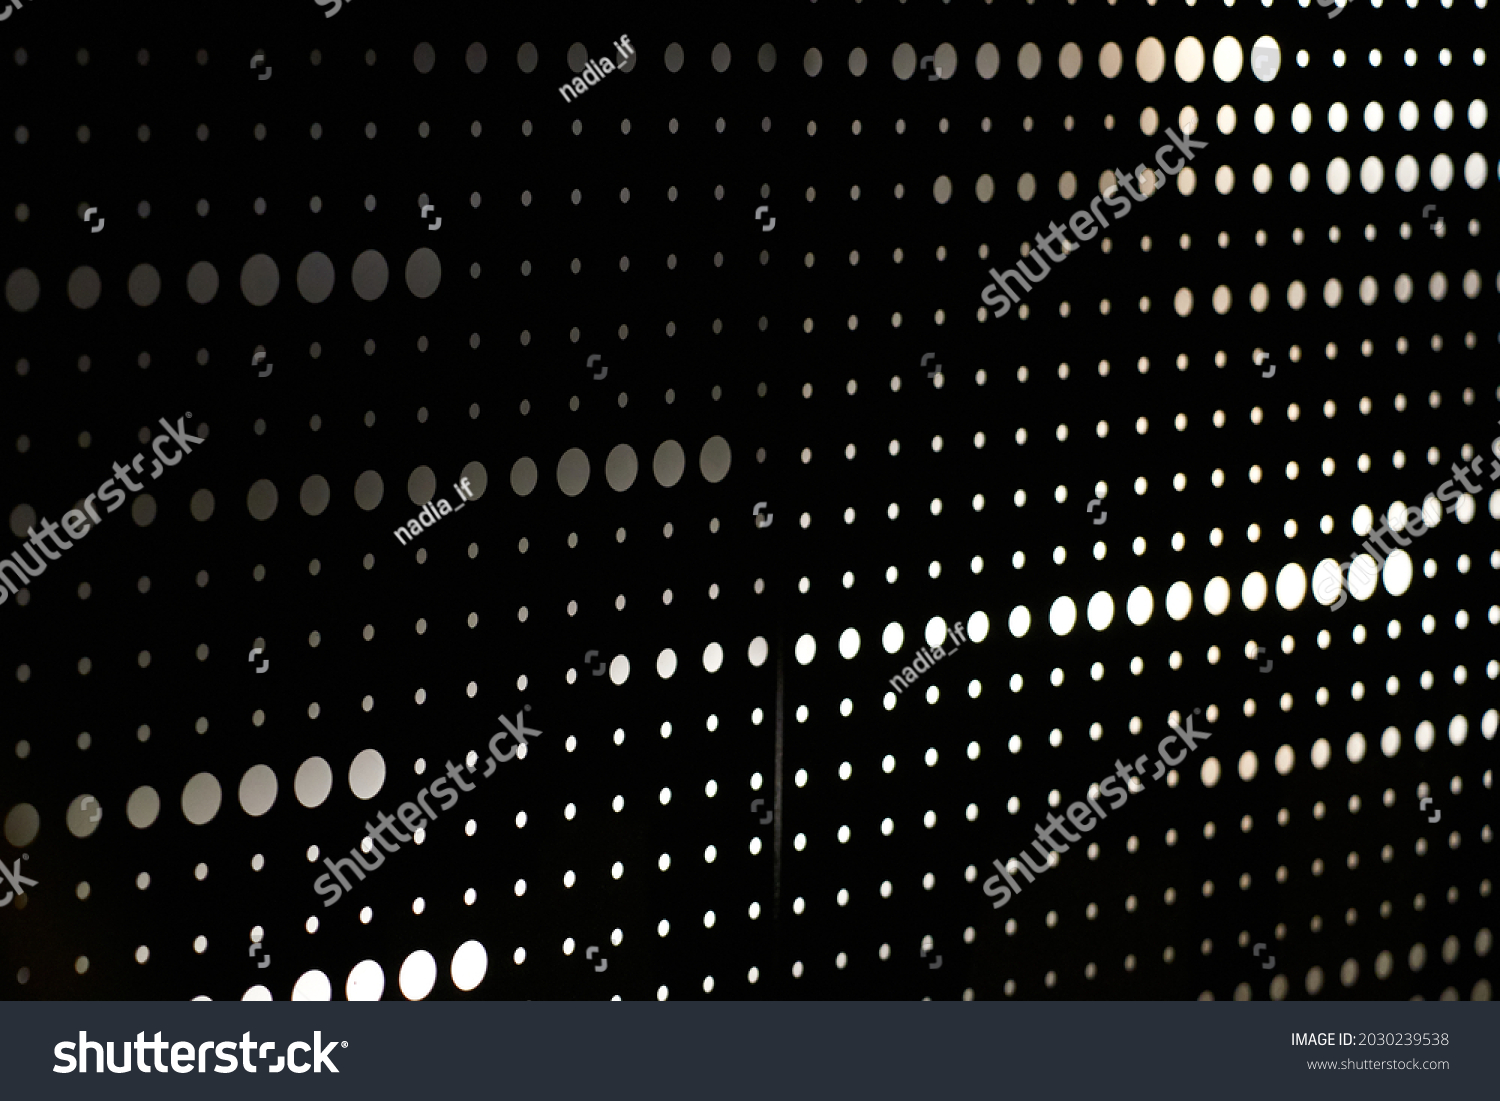 Abstract grunge grid polka dot halftone background pattern. Spotted black and white line illustration. Textures. #2030239538